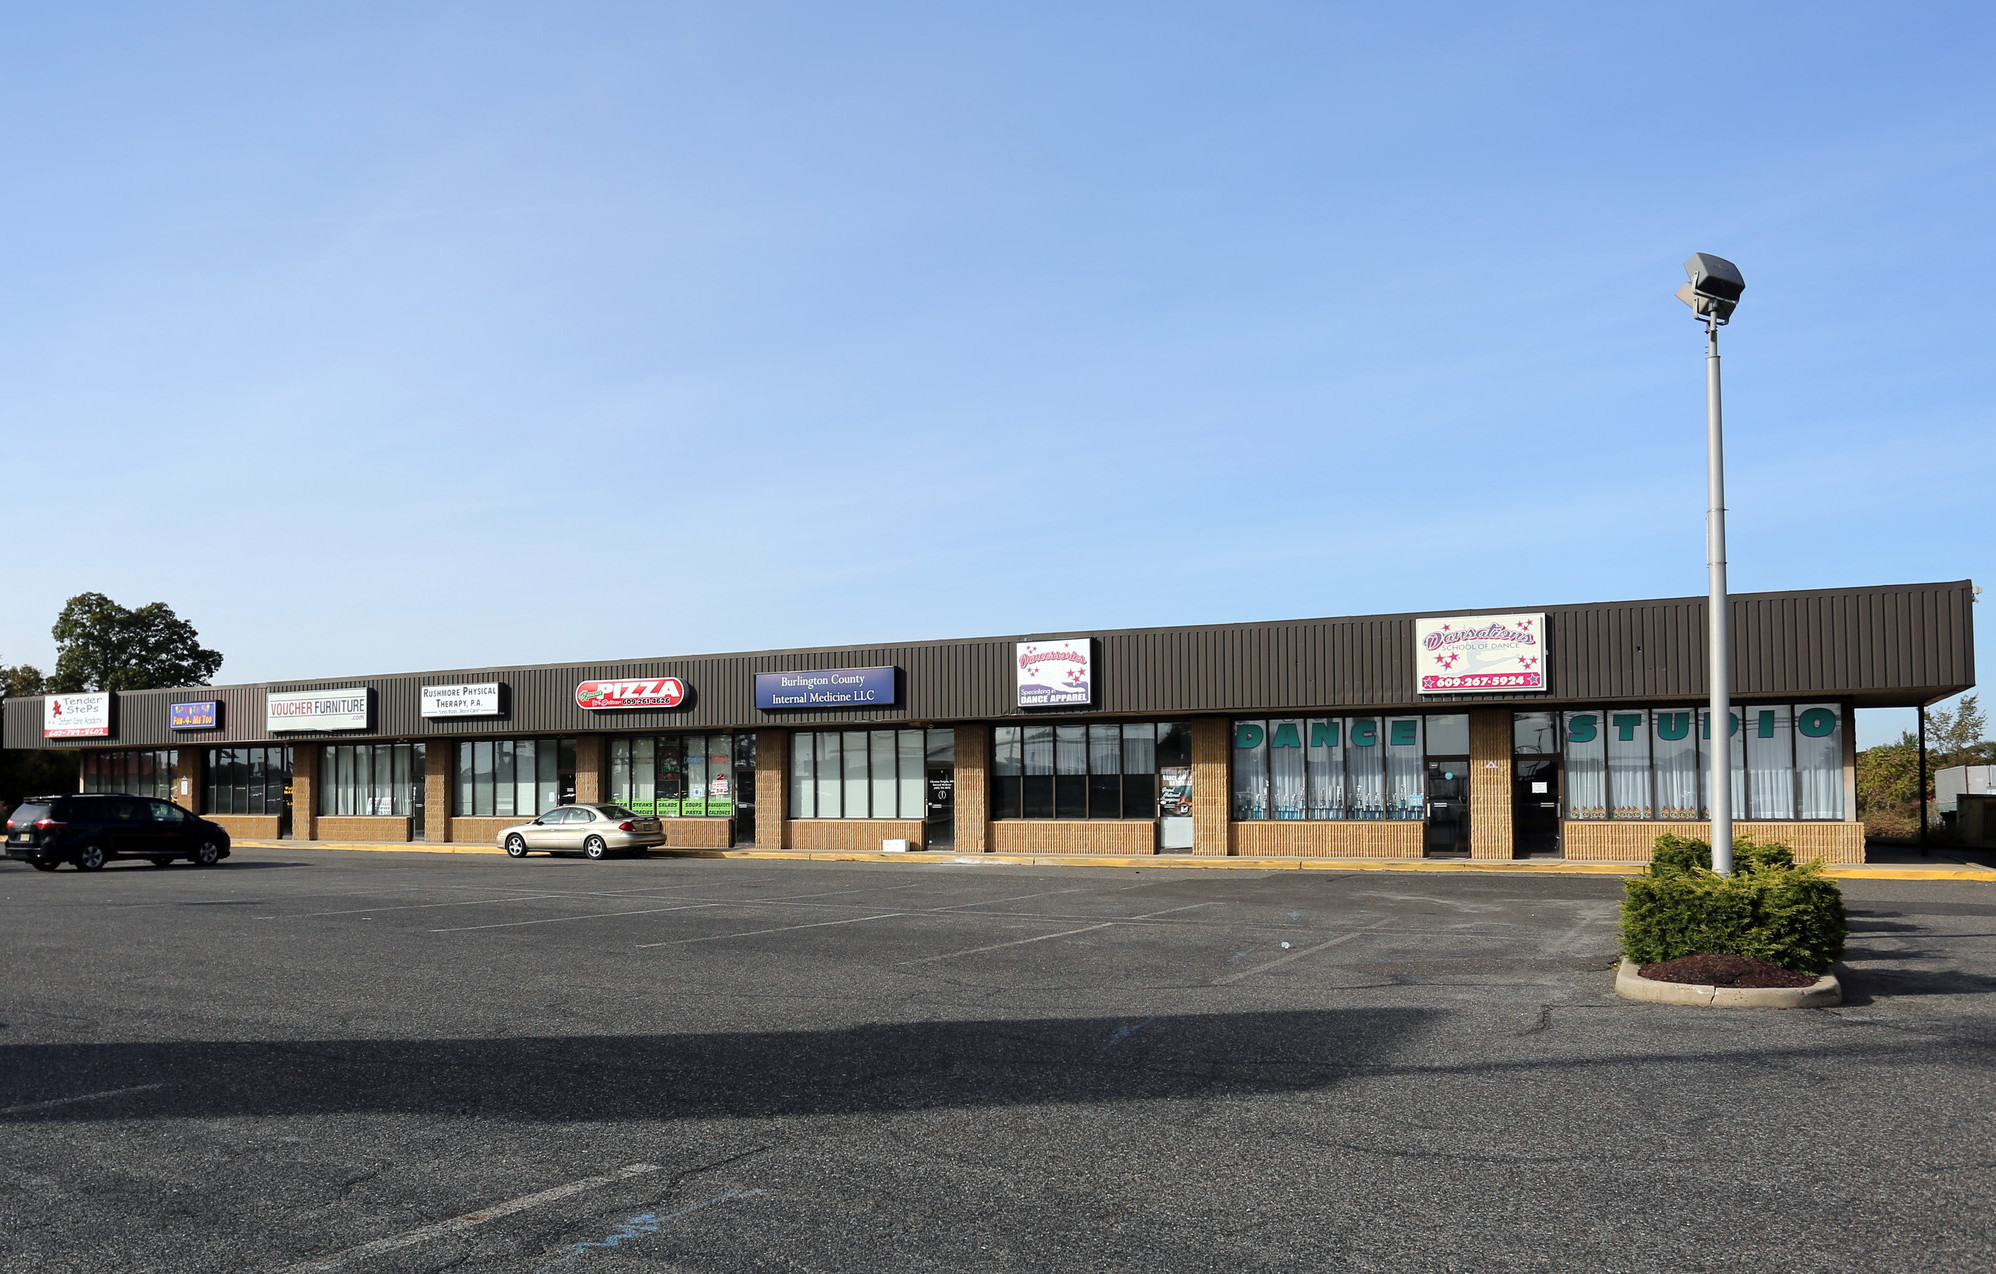 Sale of 44,750 +/- SF Retail Strip Center and Warehouse, Hainesport, NJ